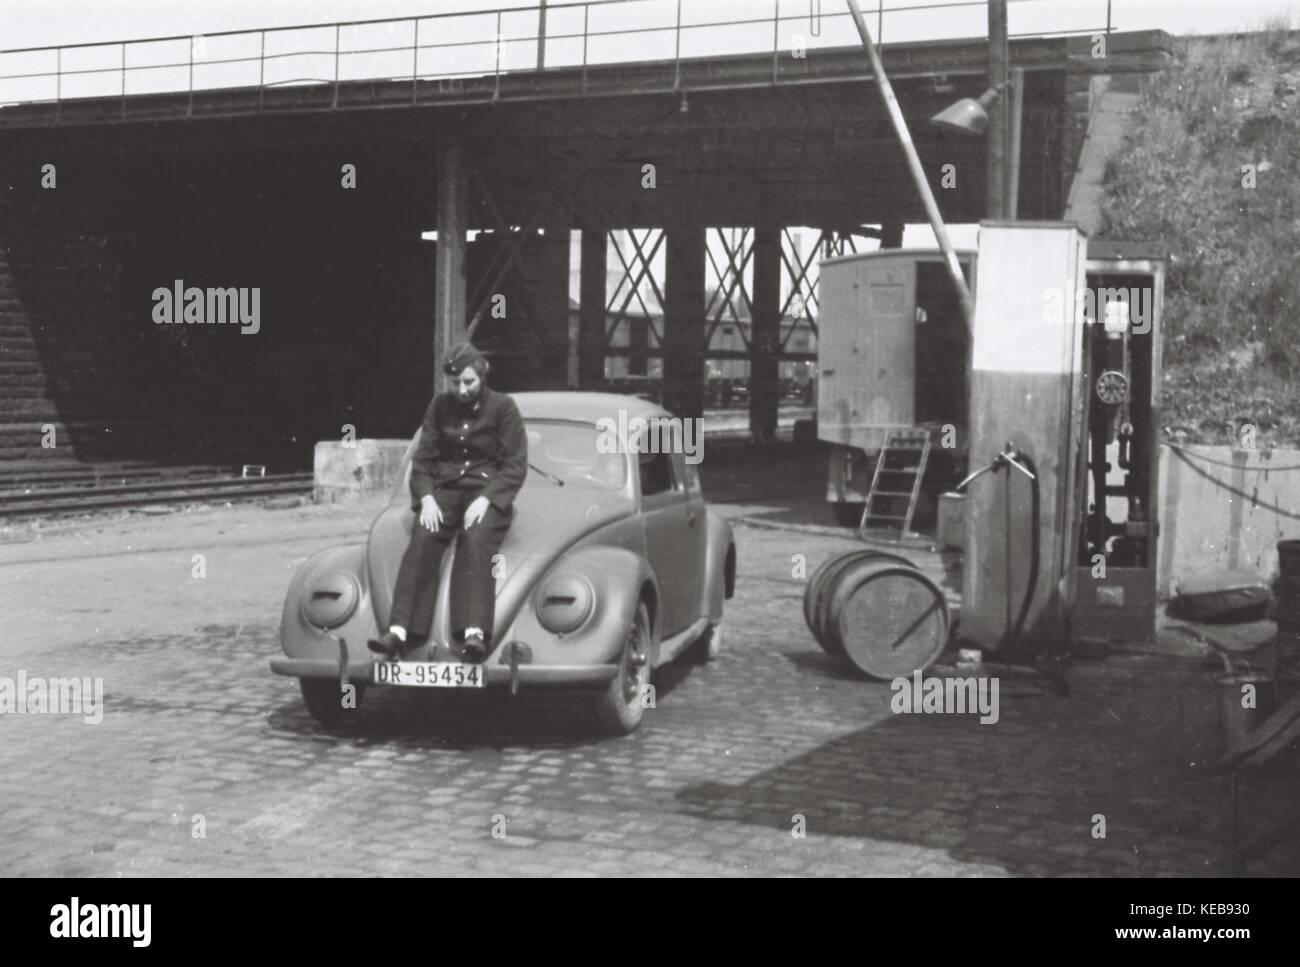 May 1943, Frankfurt am Main: This series of six pictures shows the very rare 'KdF beetle', a predecessor of the VW Beetle. Only a few hundred of these cars are been built in Germany and only a handful of them survived the war. The Deutsche Reichsbahn requisitioned private cars since 1941 for the transport of things, which were seen as important for the war. Requisitioning a KdF Beetle was nearly impossible, so the six photos show the enthusiasm of the crew oft he 4. Transport Battallion of the Deutsche Reichsbahn, located in Frankfurt am Main in the Reichsbahndirektion Frankfurt am Main. ..... Stock Photo